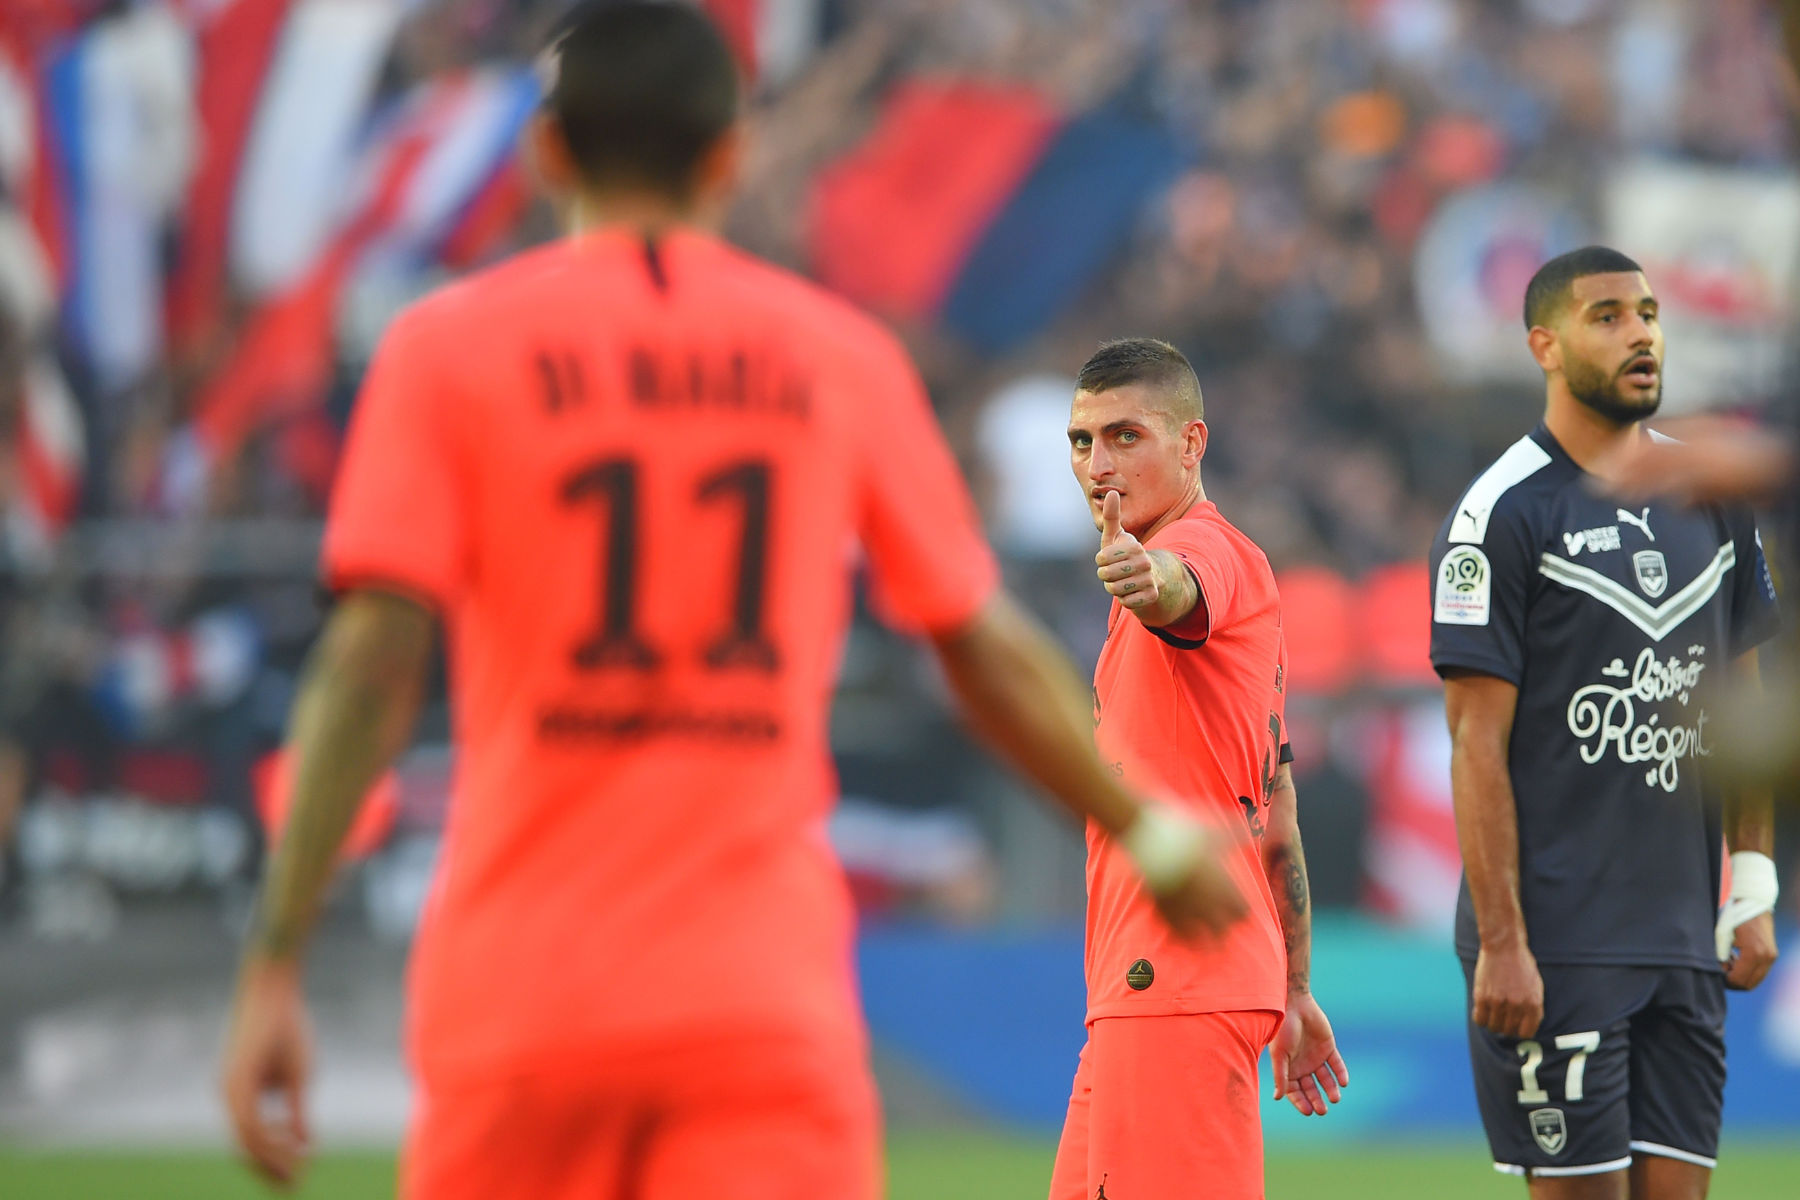 Opinion: Why I Don't Want PSG to Wear Their New Black Jordan Kit in the  Champions League - PSG Talk